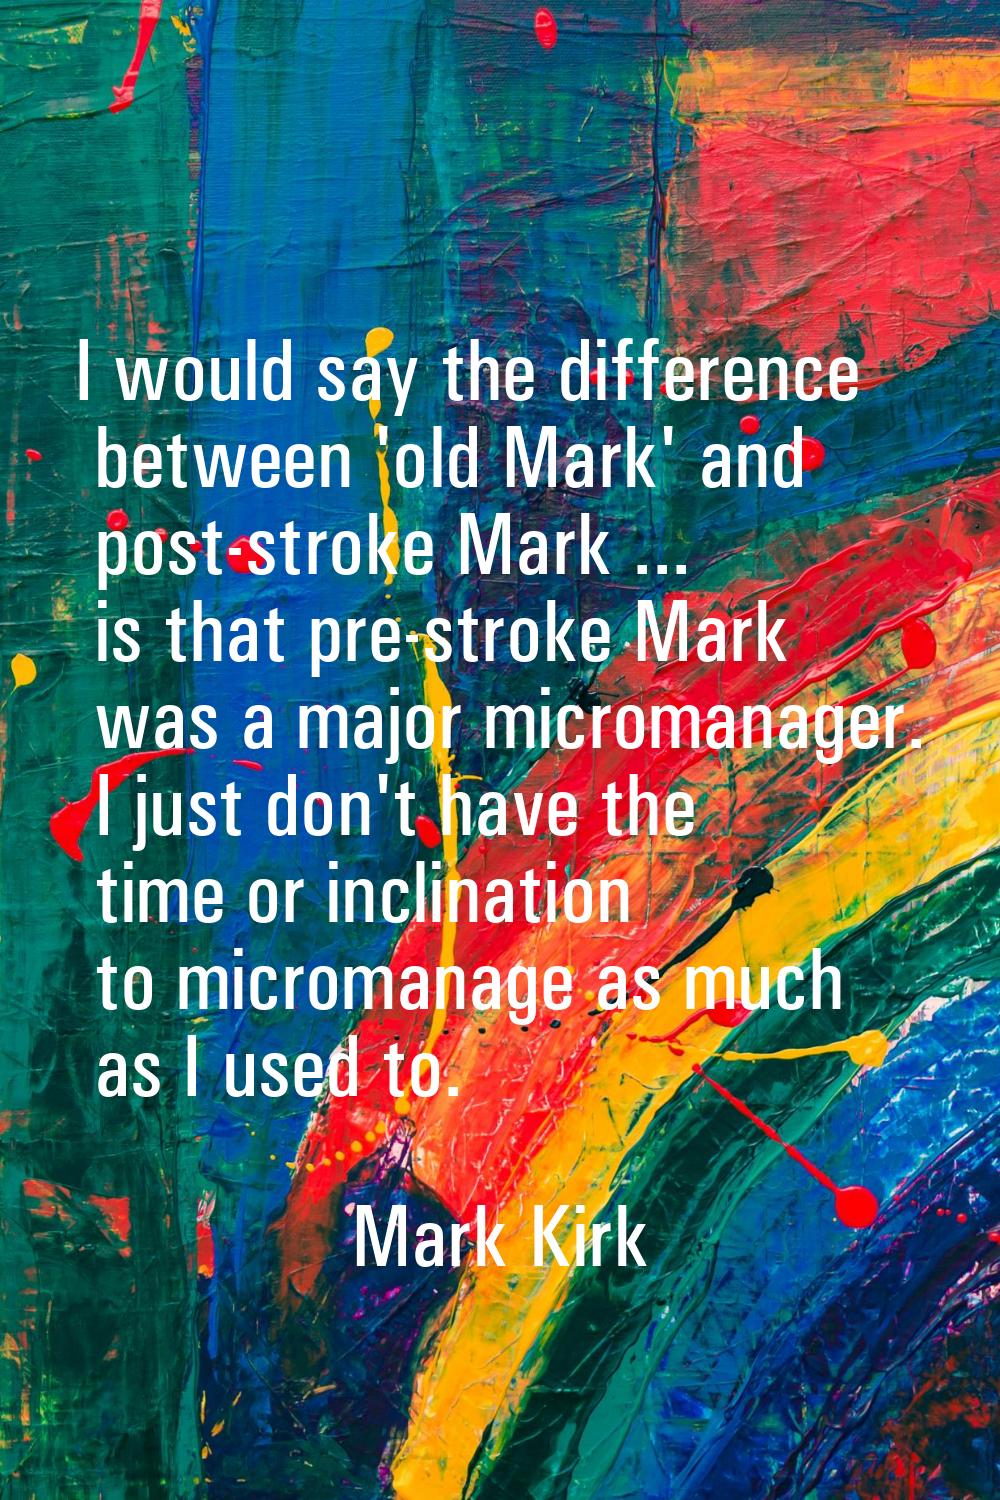 I would say the difference between 'old Mark' and post-stroke Mark ... is that pre-stroke Mark was 